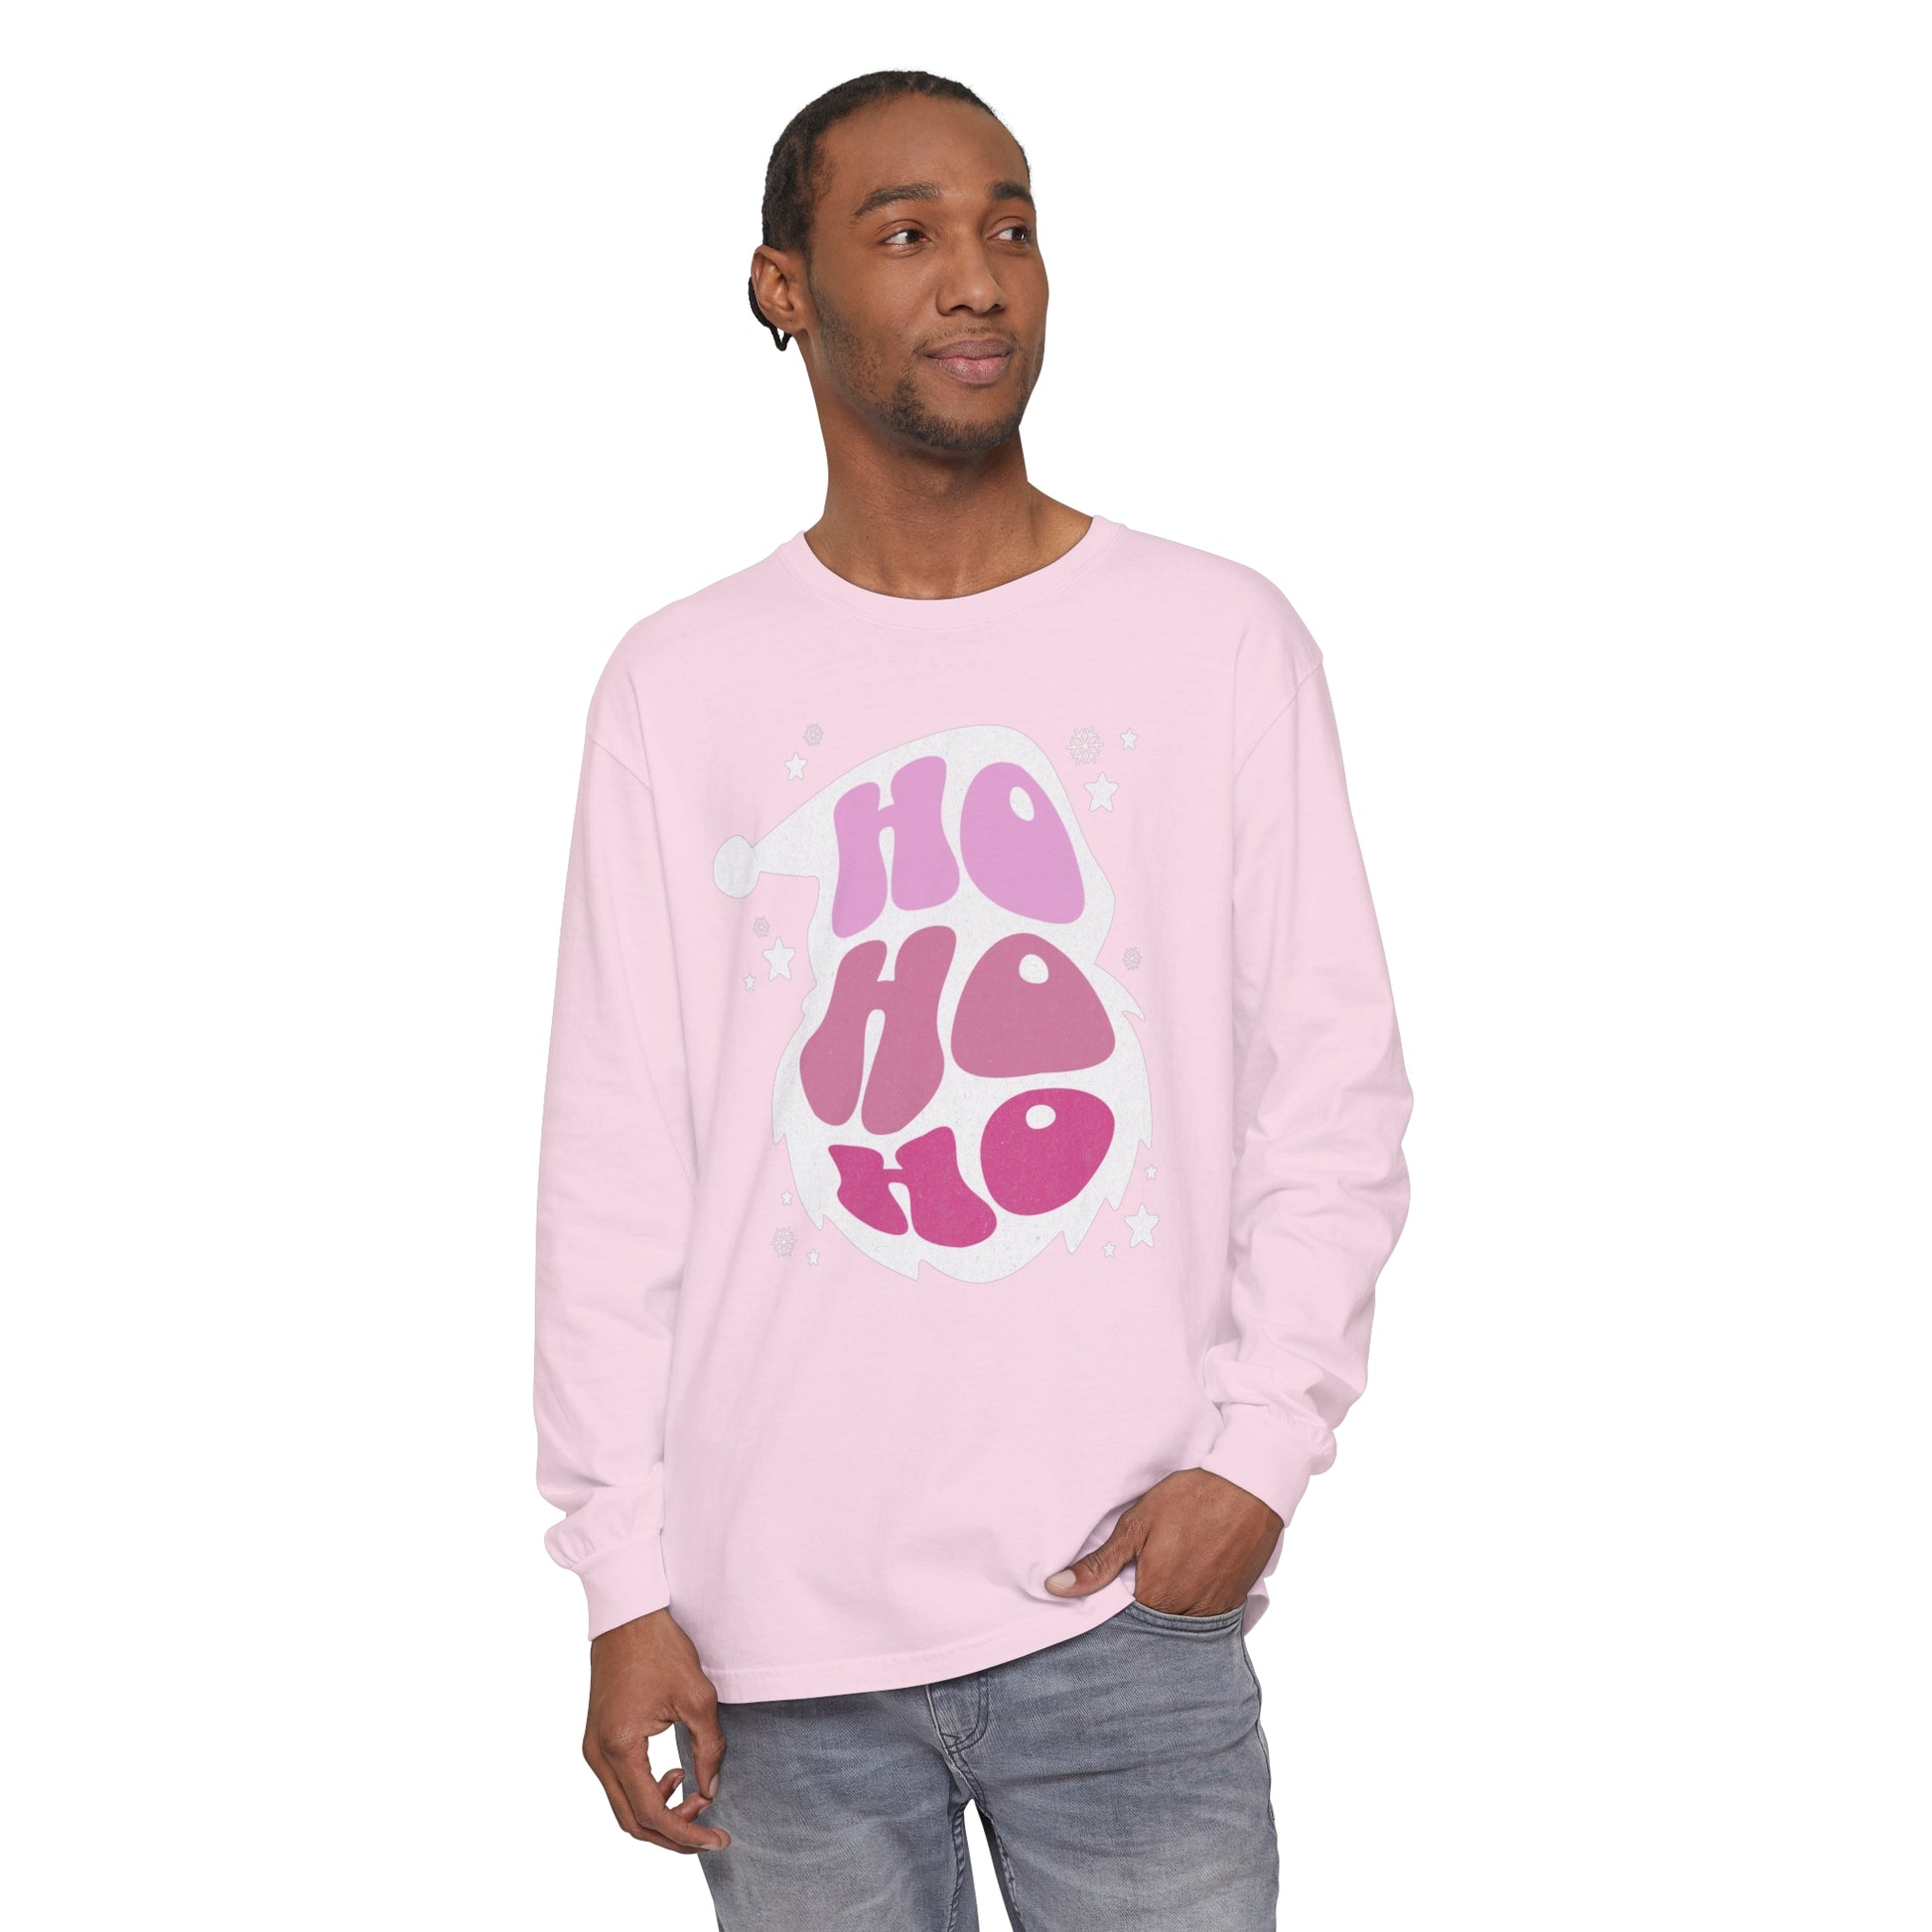 A man wearing a cozy pink long sleeve t-shirt with the word "HO HO HO Santa Outline" on it, perfect for holiday style.